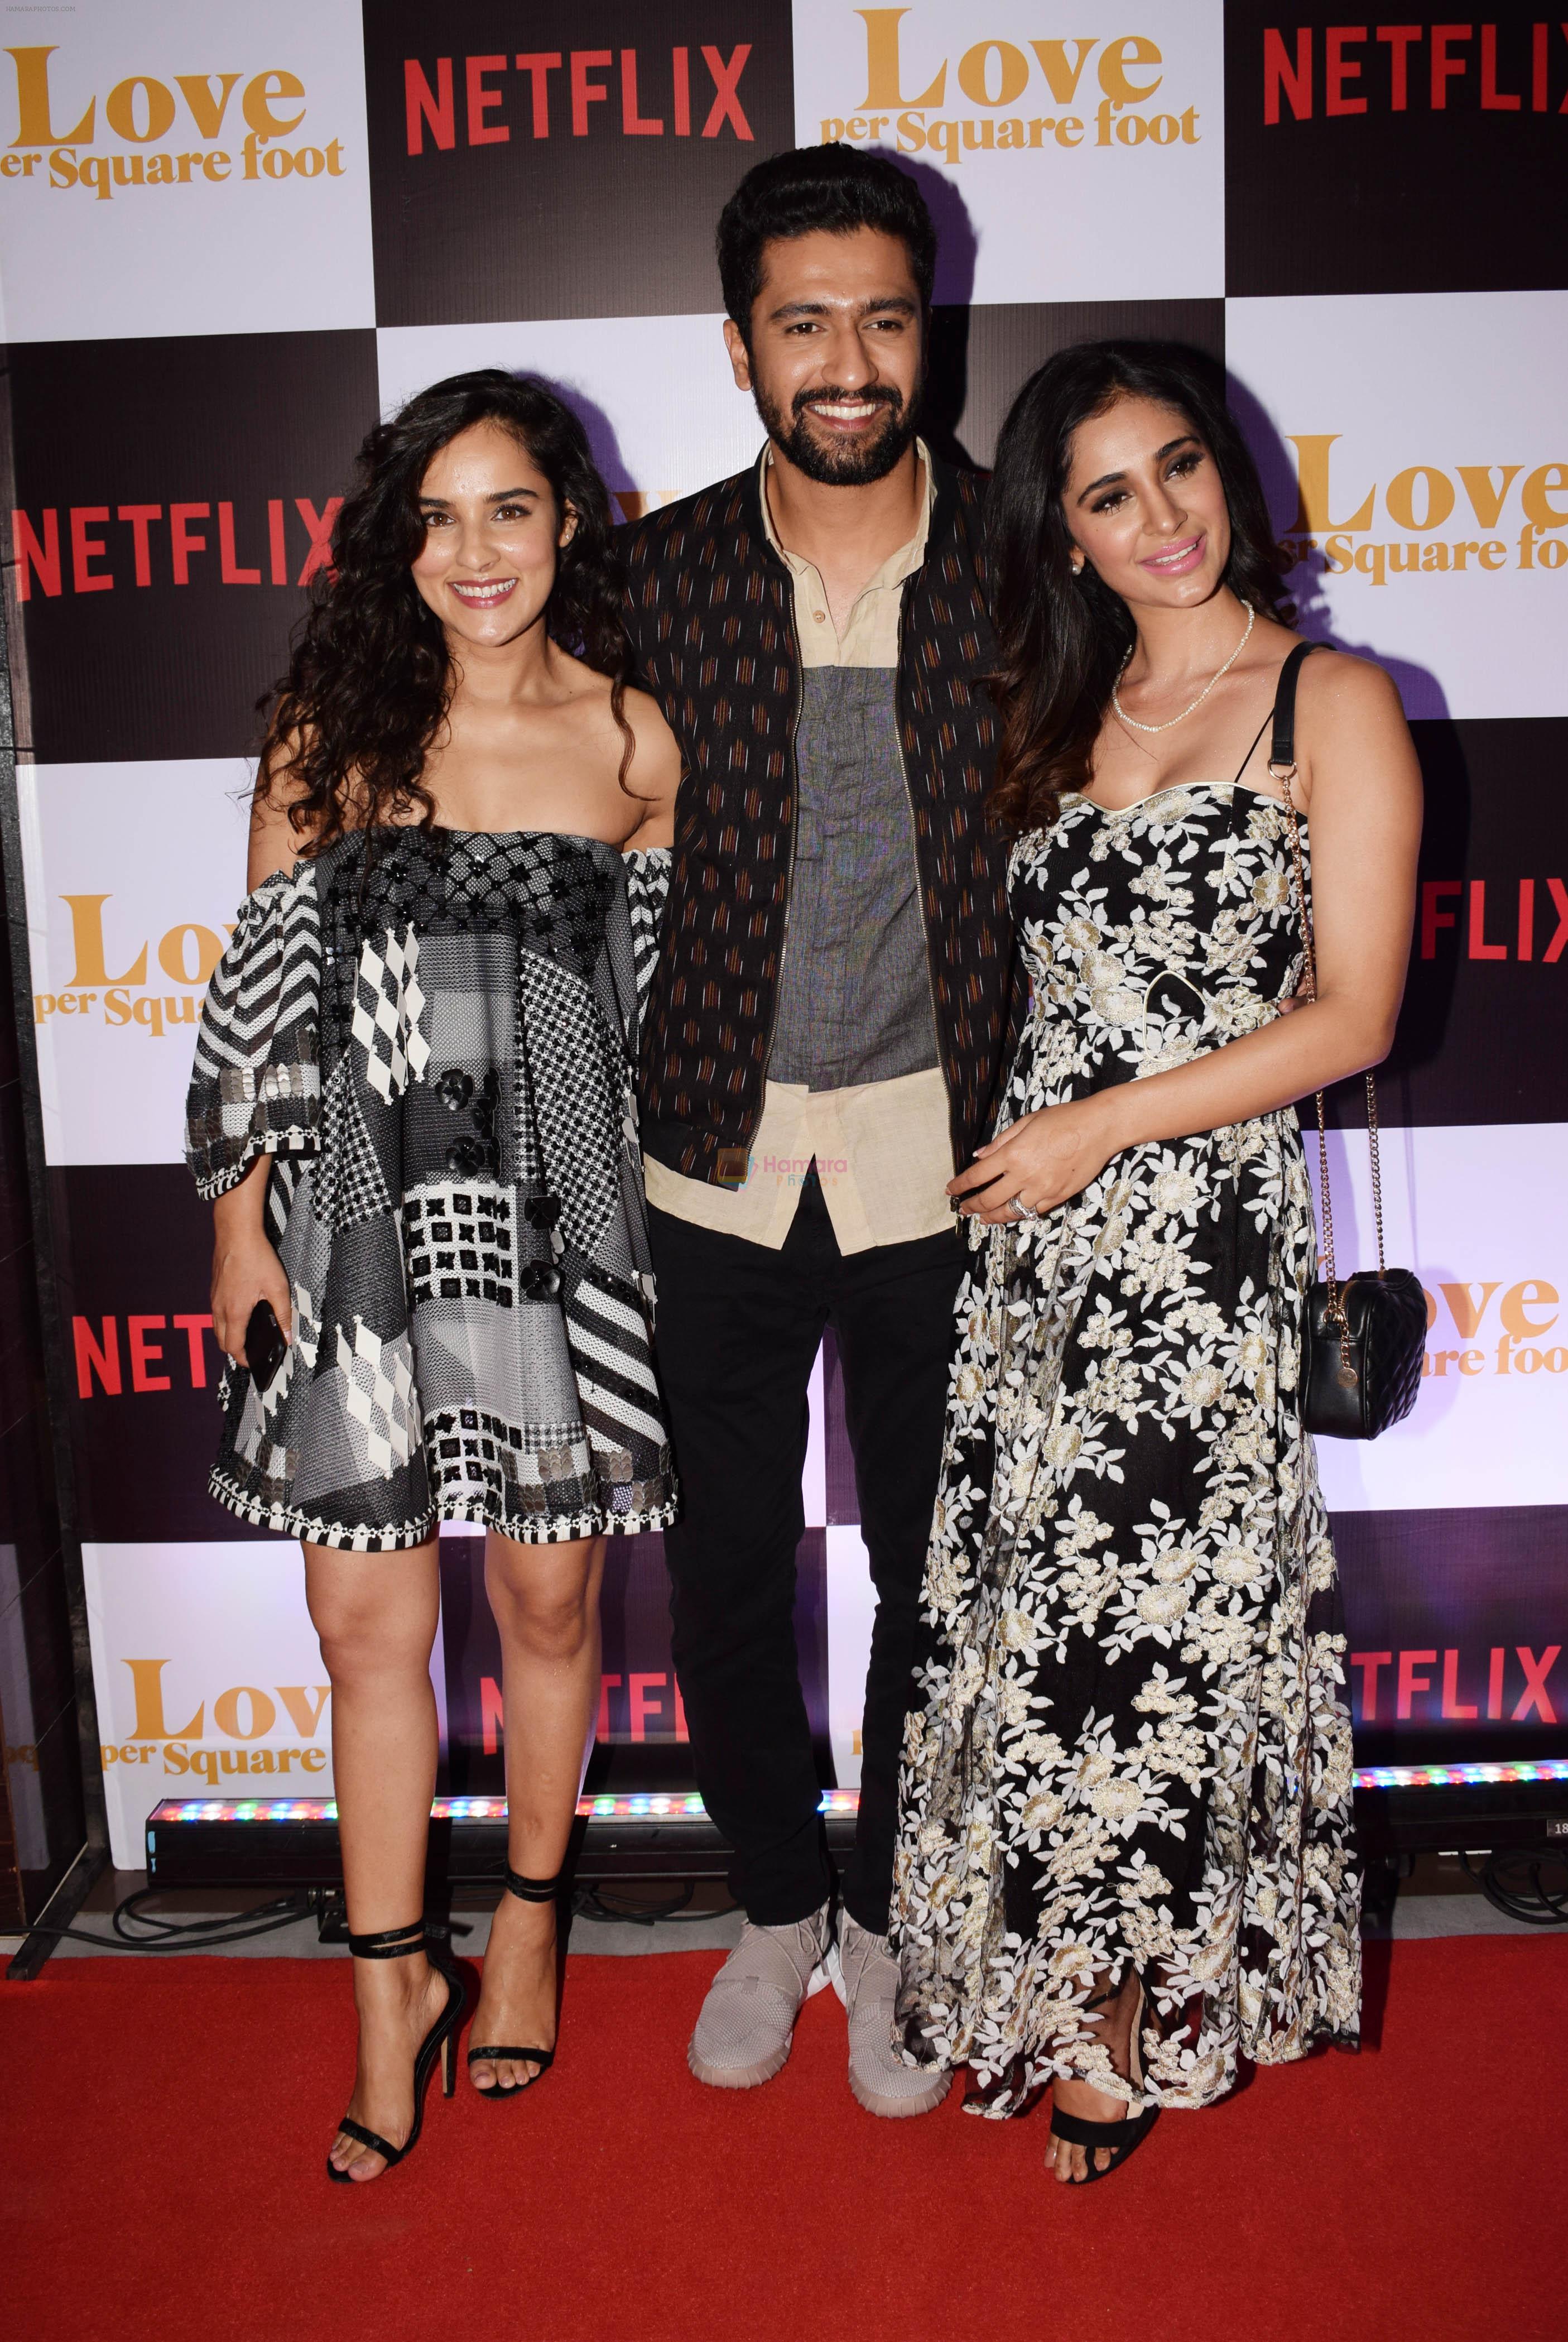 Vicky Kaushal, Angira Dhar at the Screening of Ronnie Screwvala's film Love per square foot in Cinepolis, Andheri, Mumbai on 10th Feb 2018